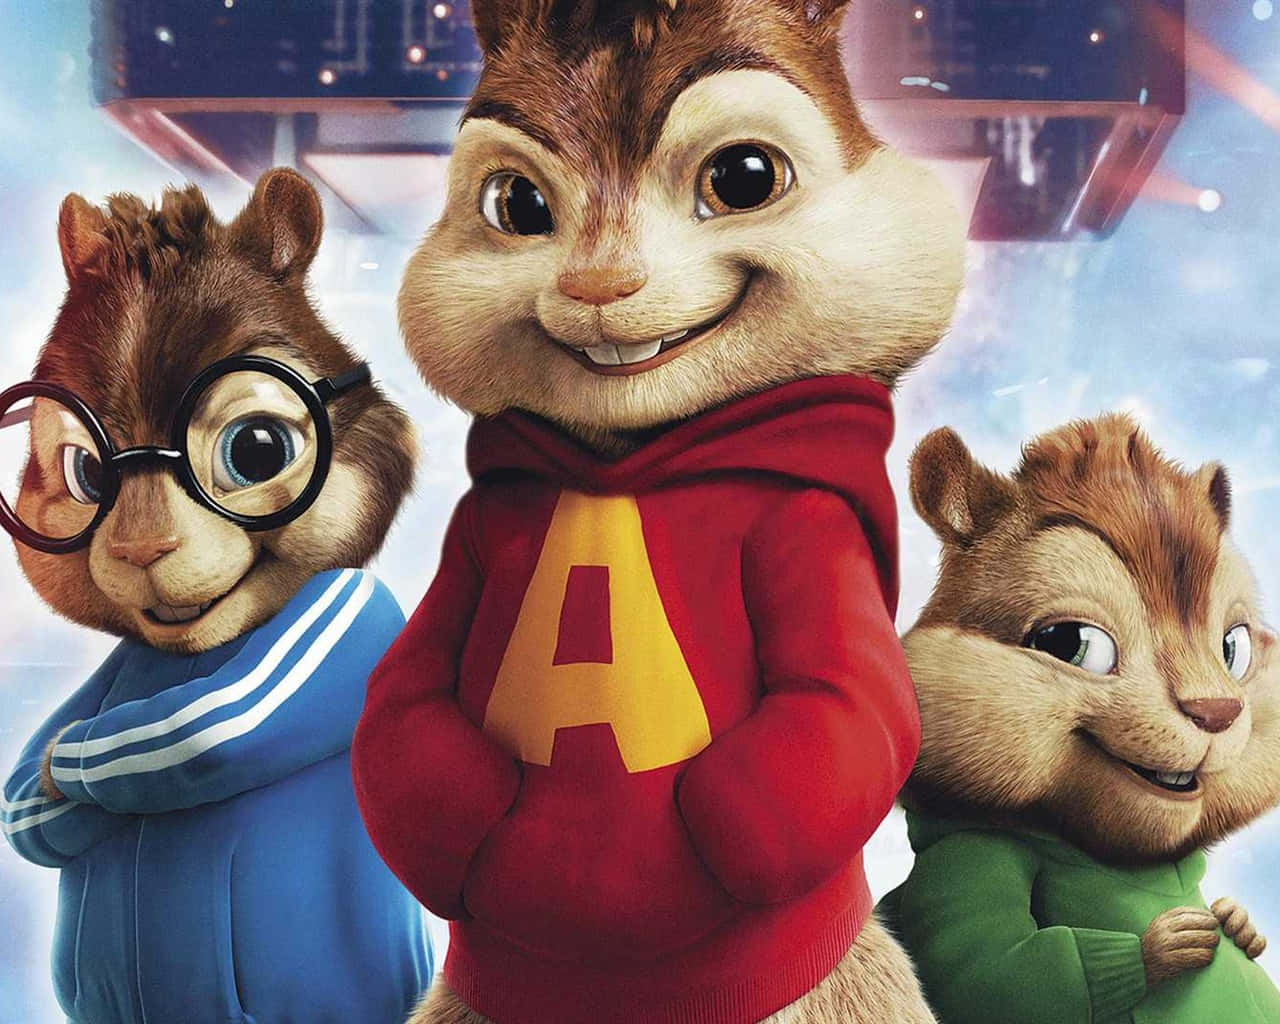 Join Alvin and the Chipmunks in The Squeakquel.